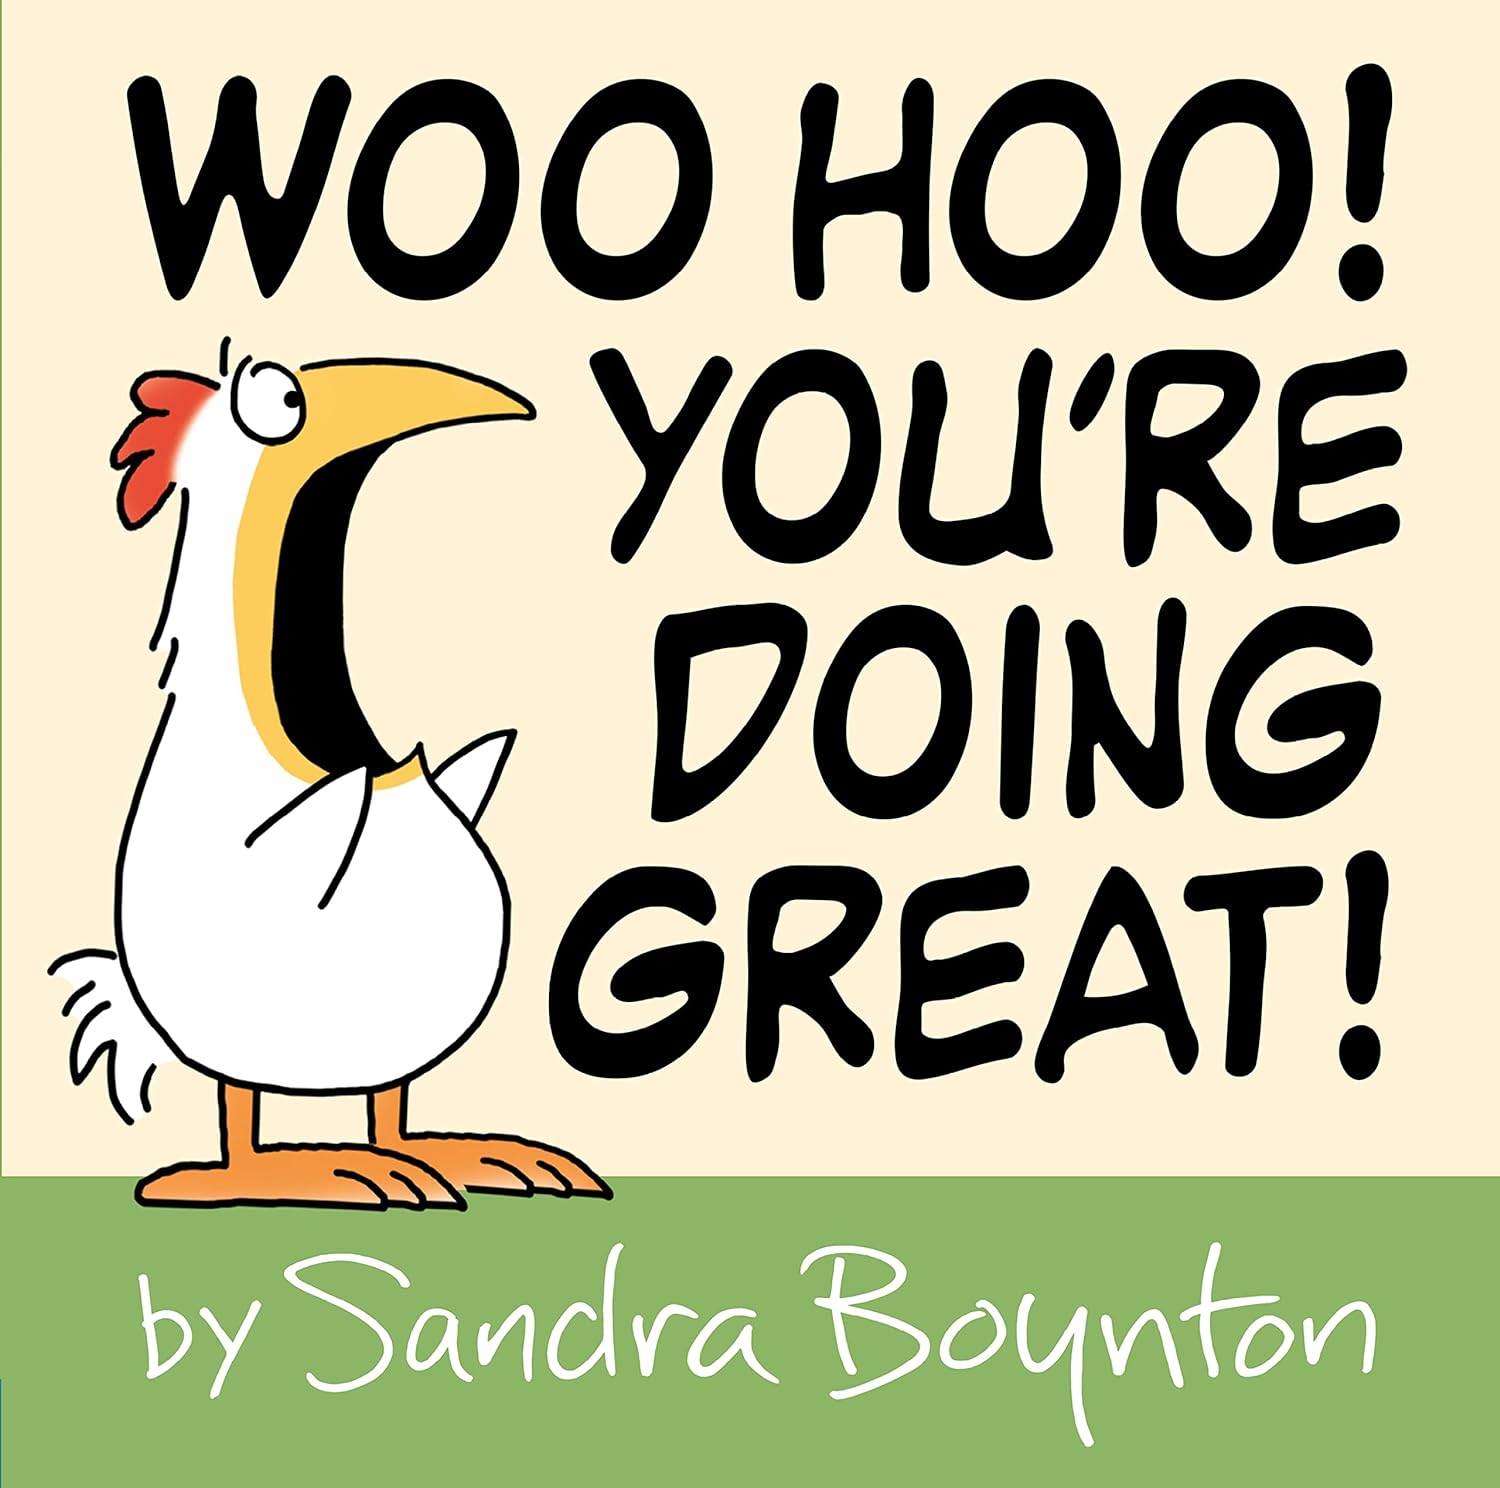 Image for "Woo Hoo! You're Doing Great!"